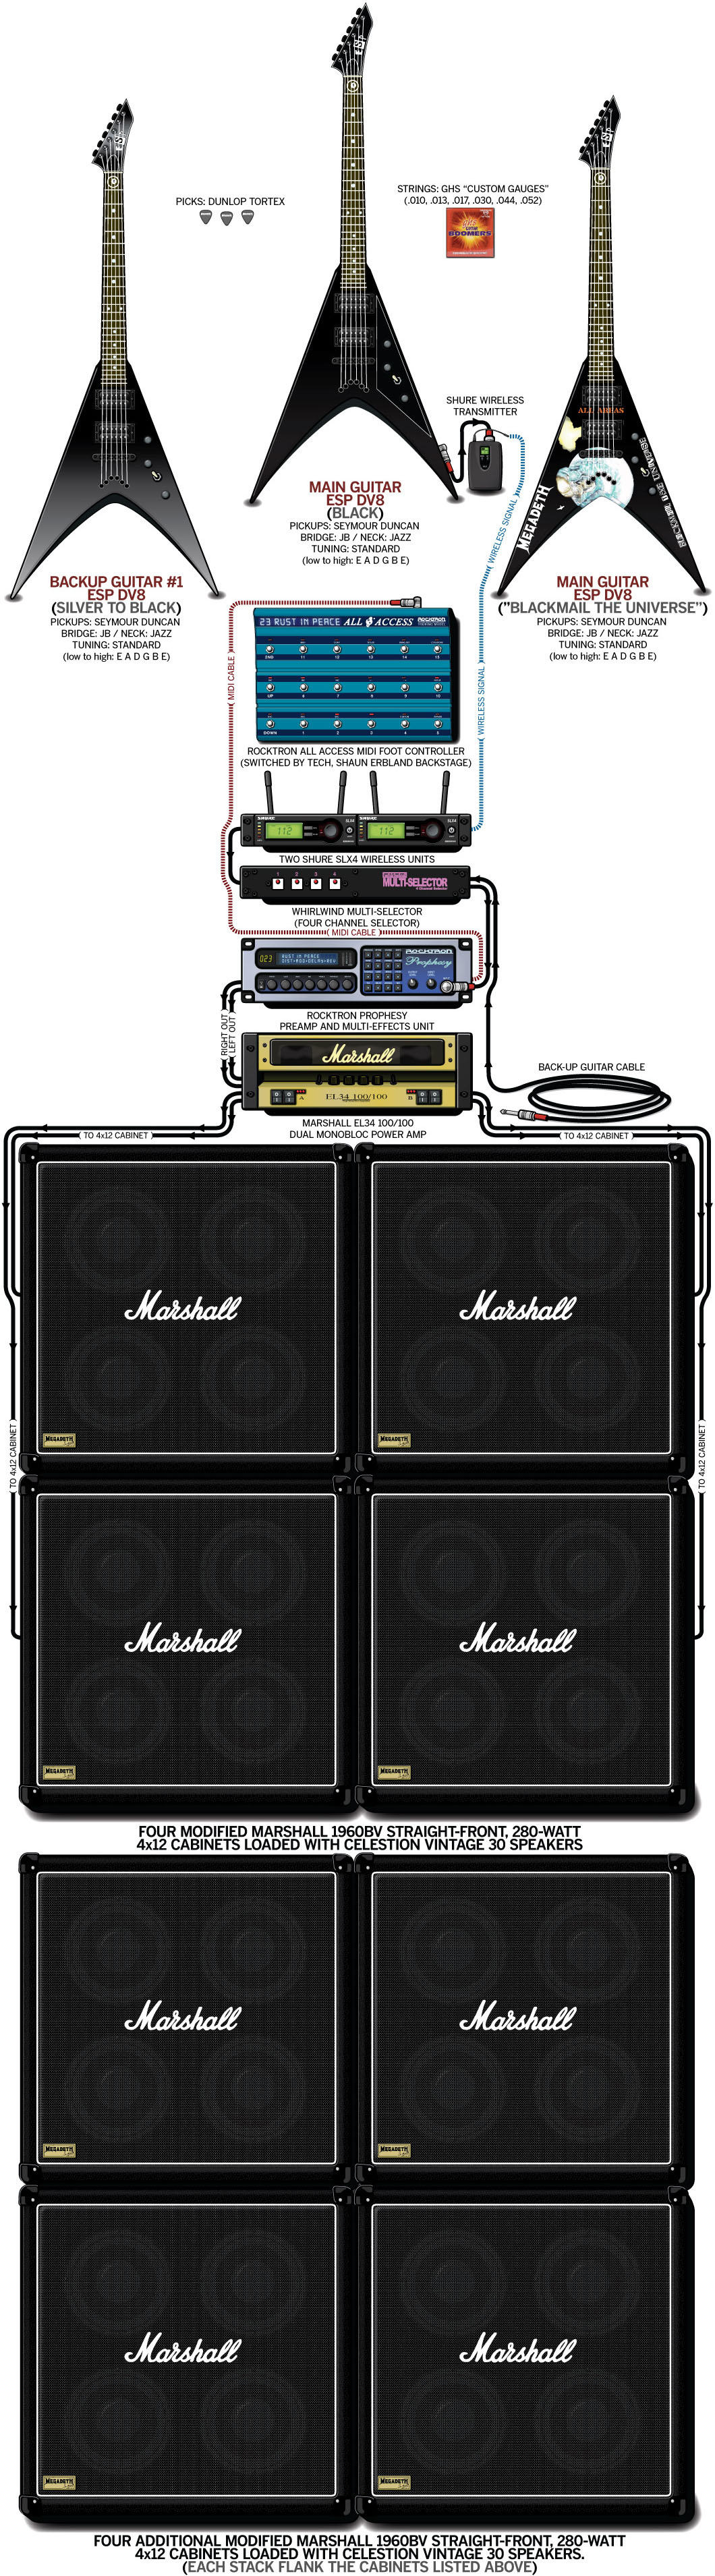 Dave Mustaine Guitar Gear & Rig – Megadeth – 2004